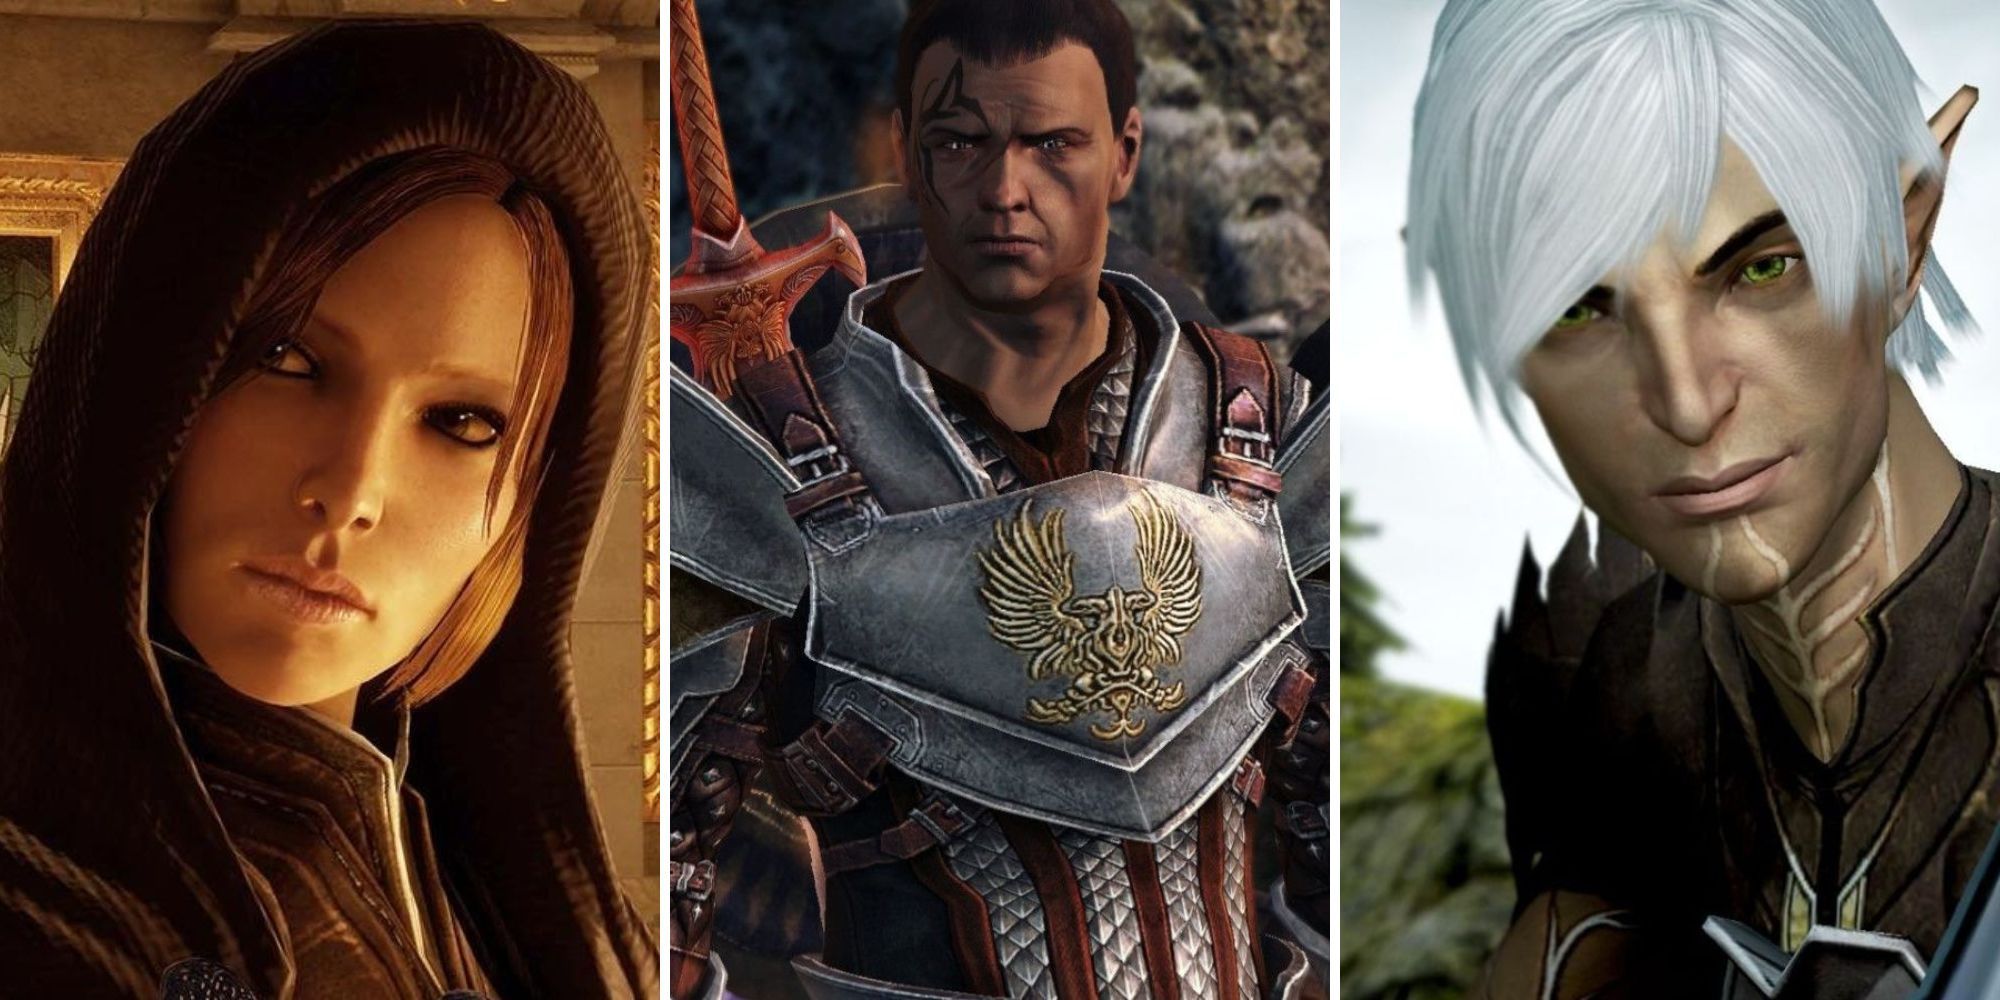 A grid of images showing the characters in this order, Leliana from Dragon Age: Inquisition, The Hero of Ferelden from Dragon Age: Origins, and Fenris from Dragon Age 2